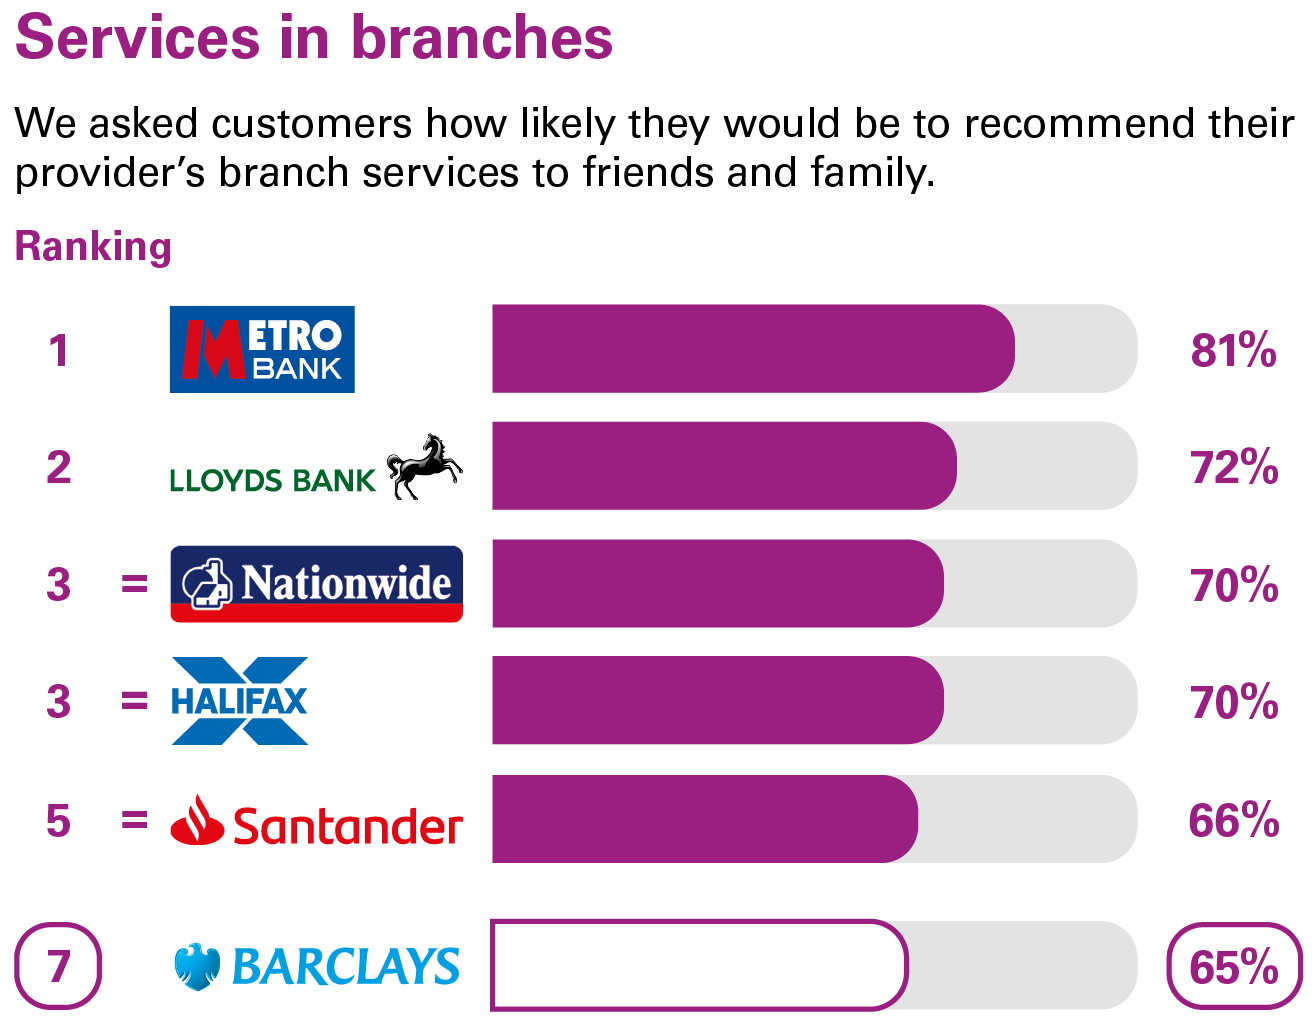 Services in branches ranking - Personal current accounts Great Britain